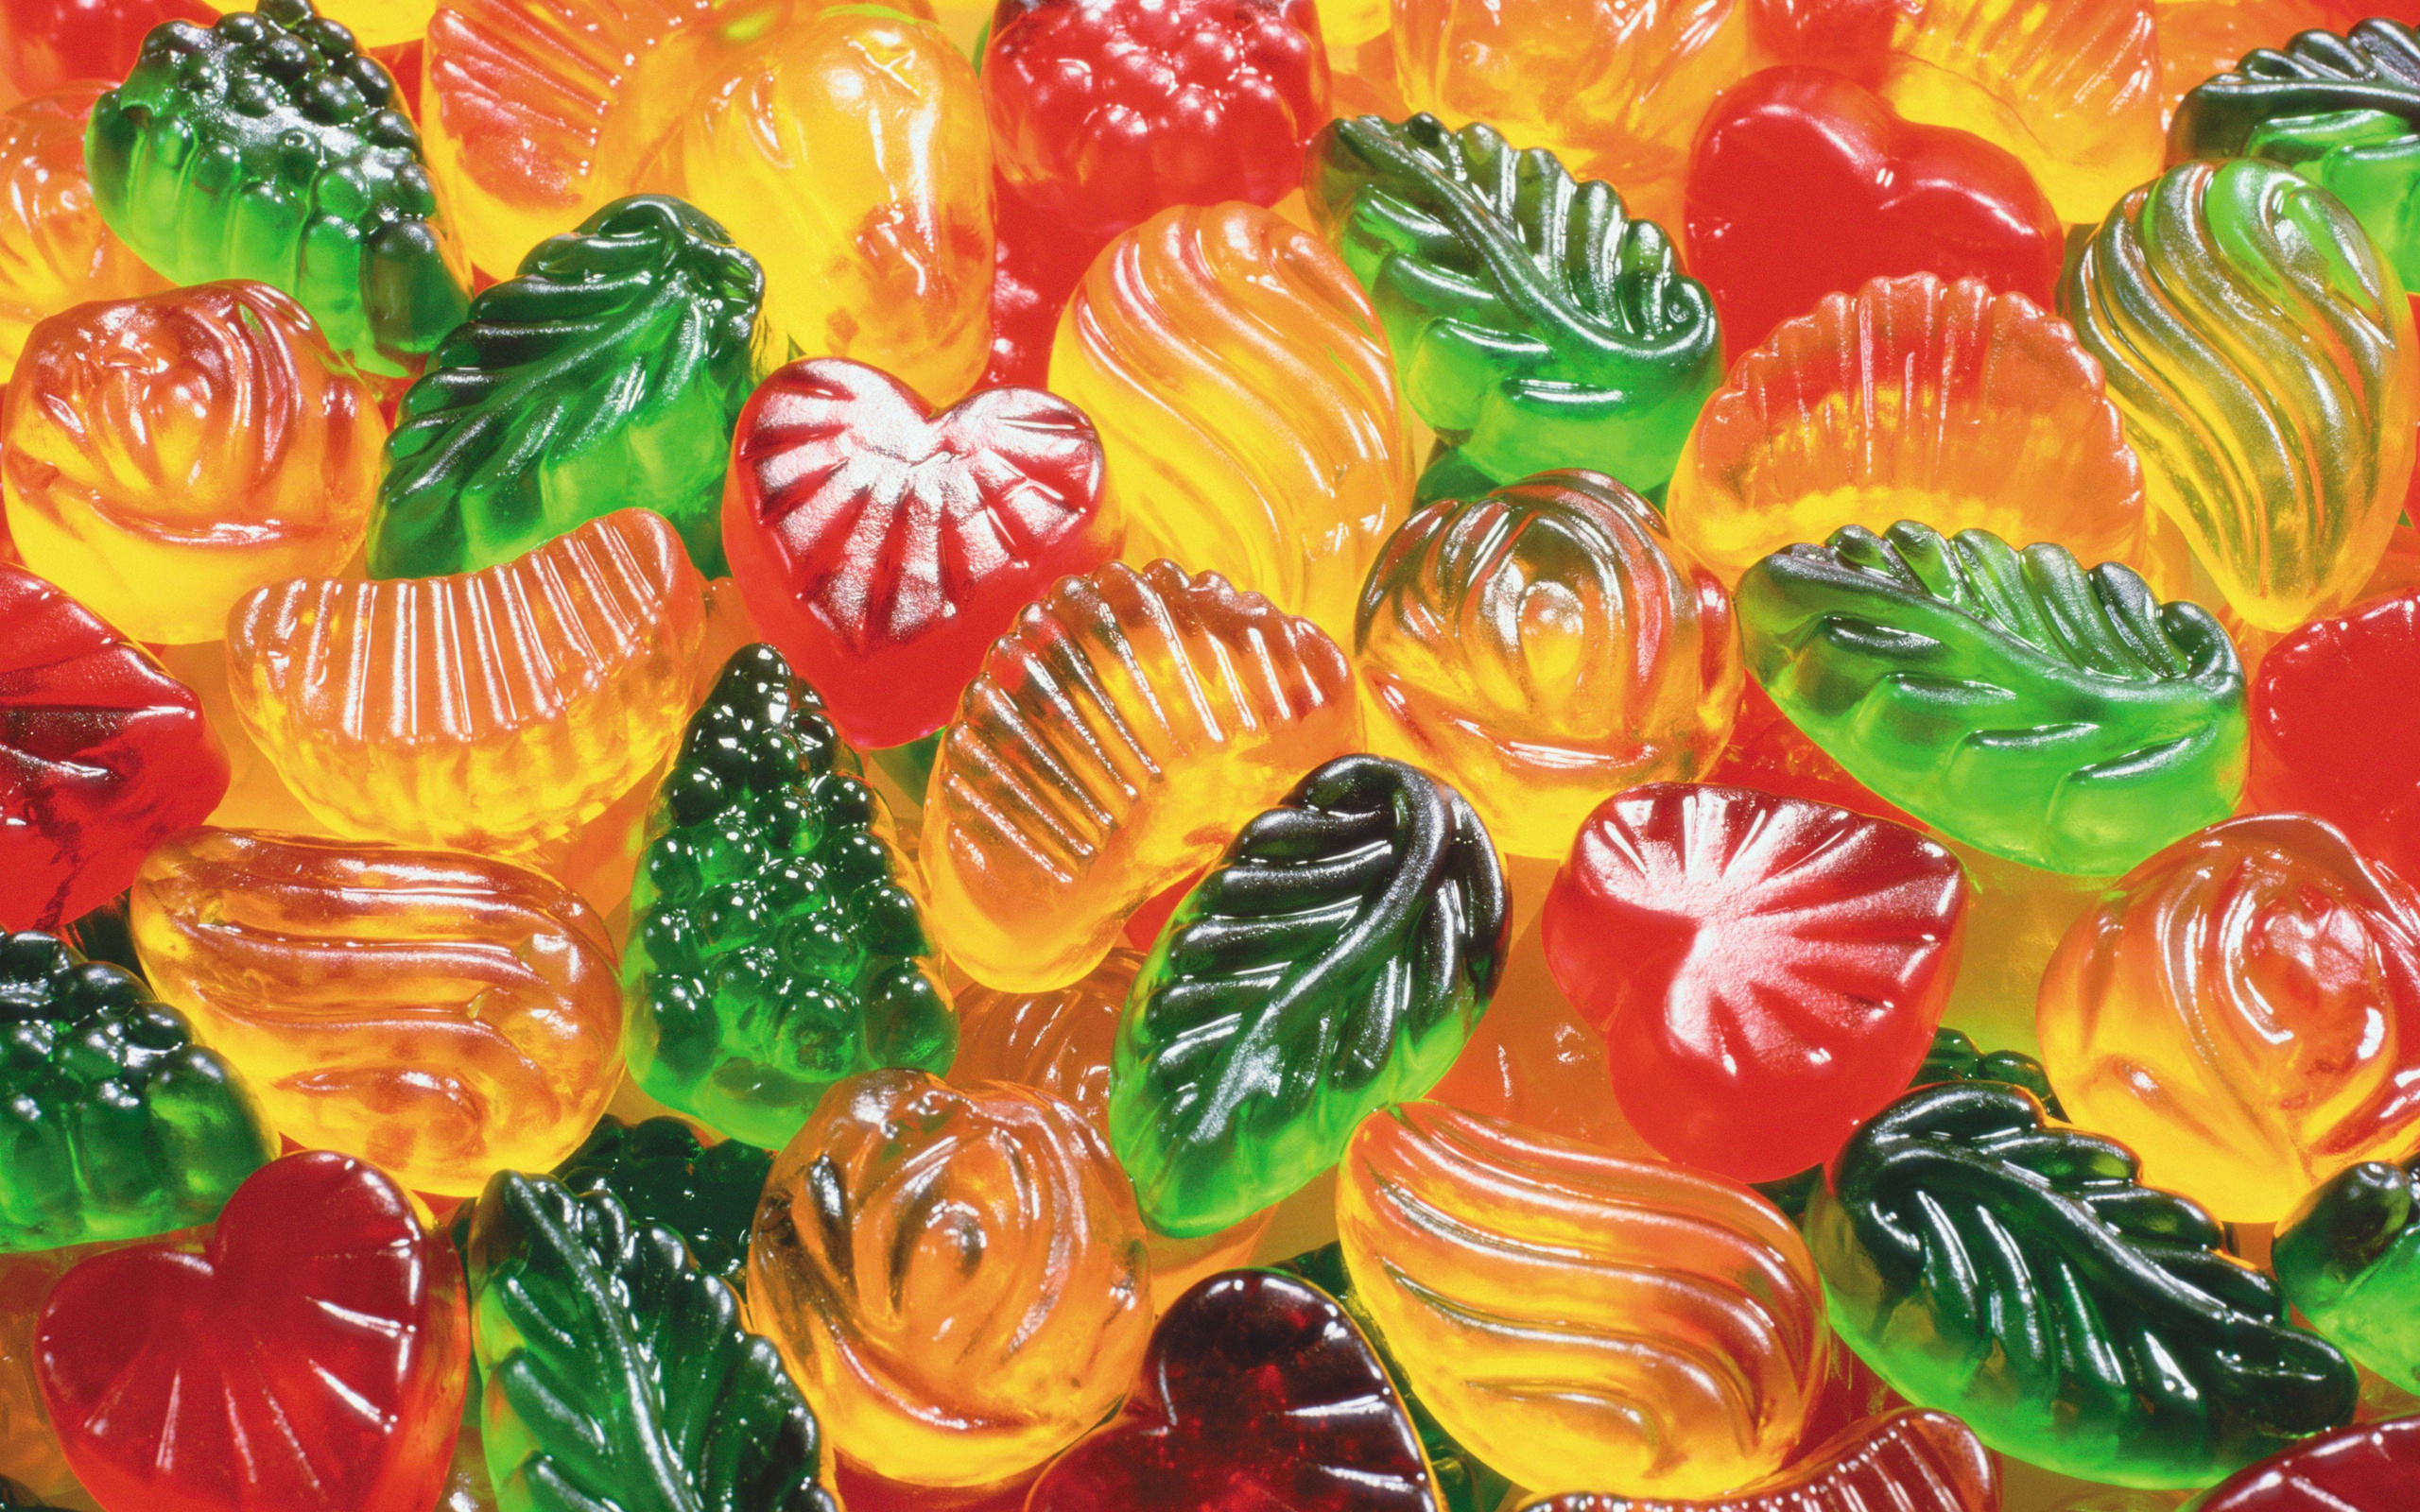 Candy-coated happiness, Vibrant candy display, Sugary temptation, Sweet tooth's paradise, 2560x1600 HD Desktop